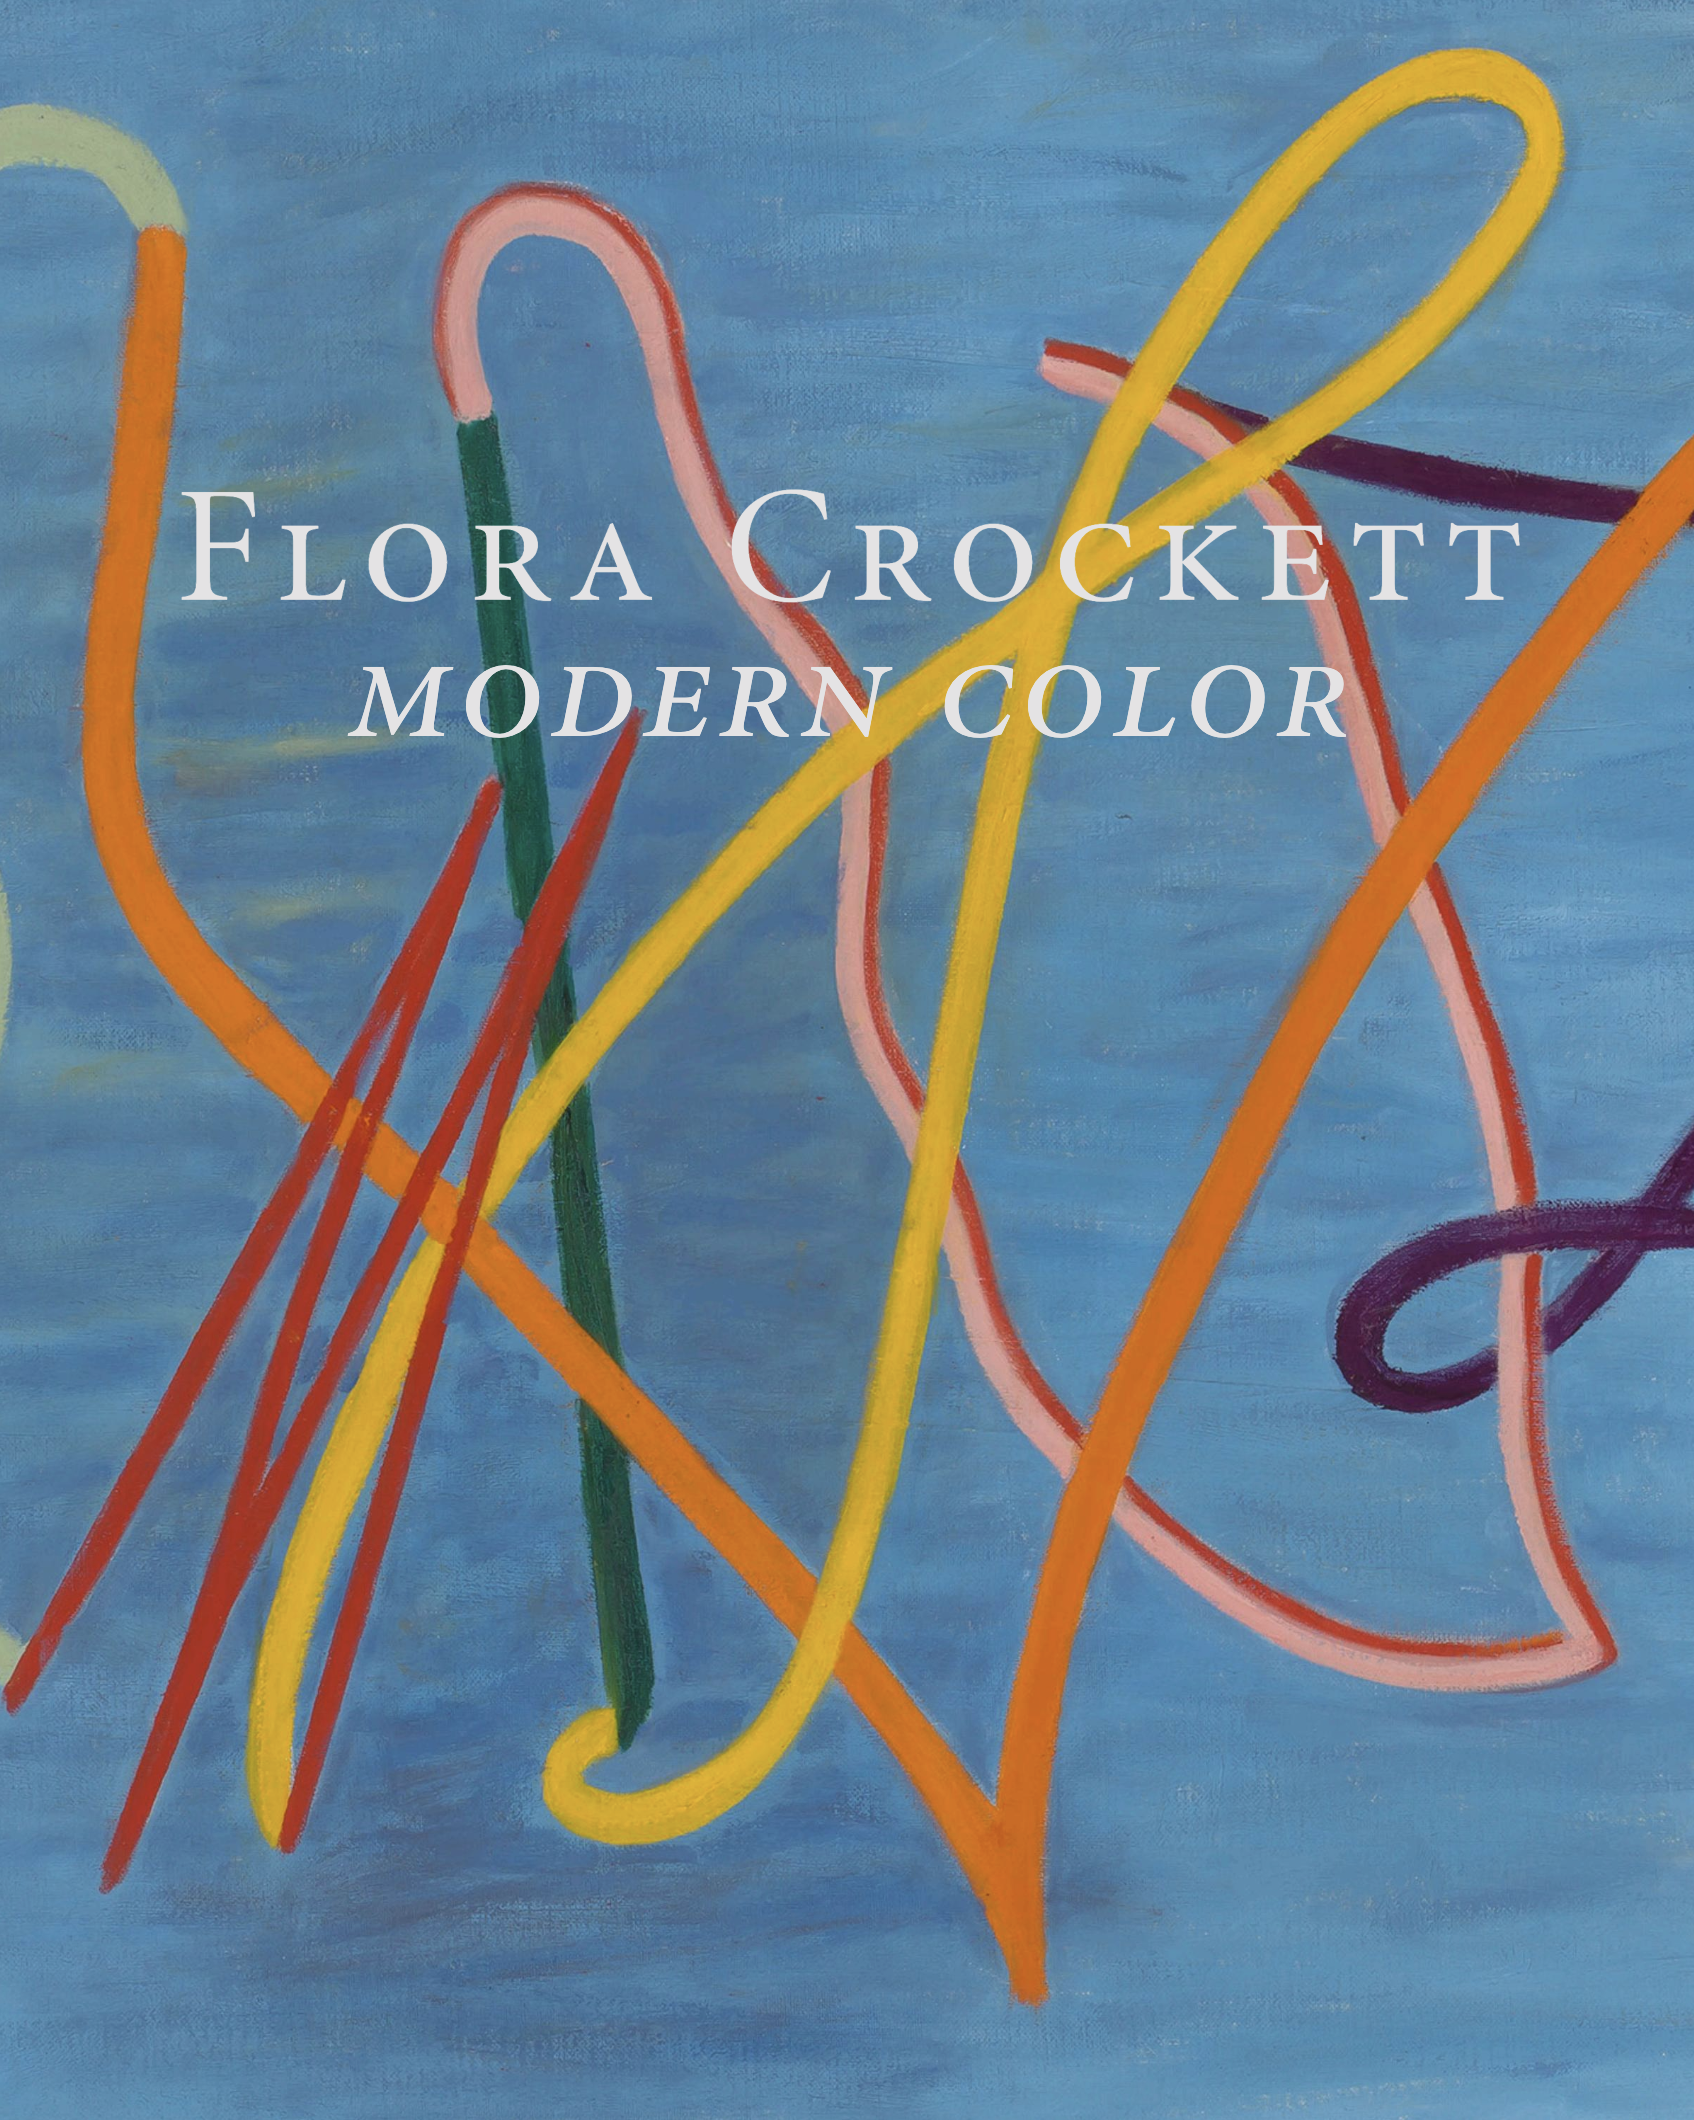 Flora Crockett: # Modern Color # 2022 &lt;alt="Catalogue cover with title over abstract painting of different color lines on a blue background"&gt; 